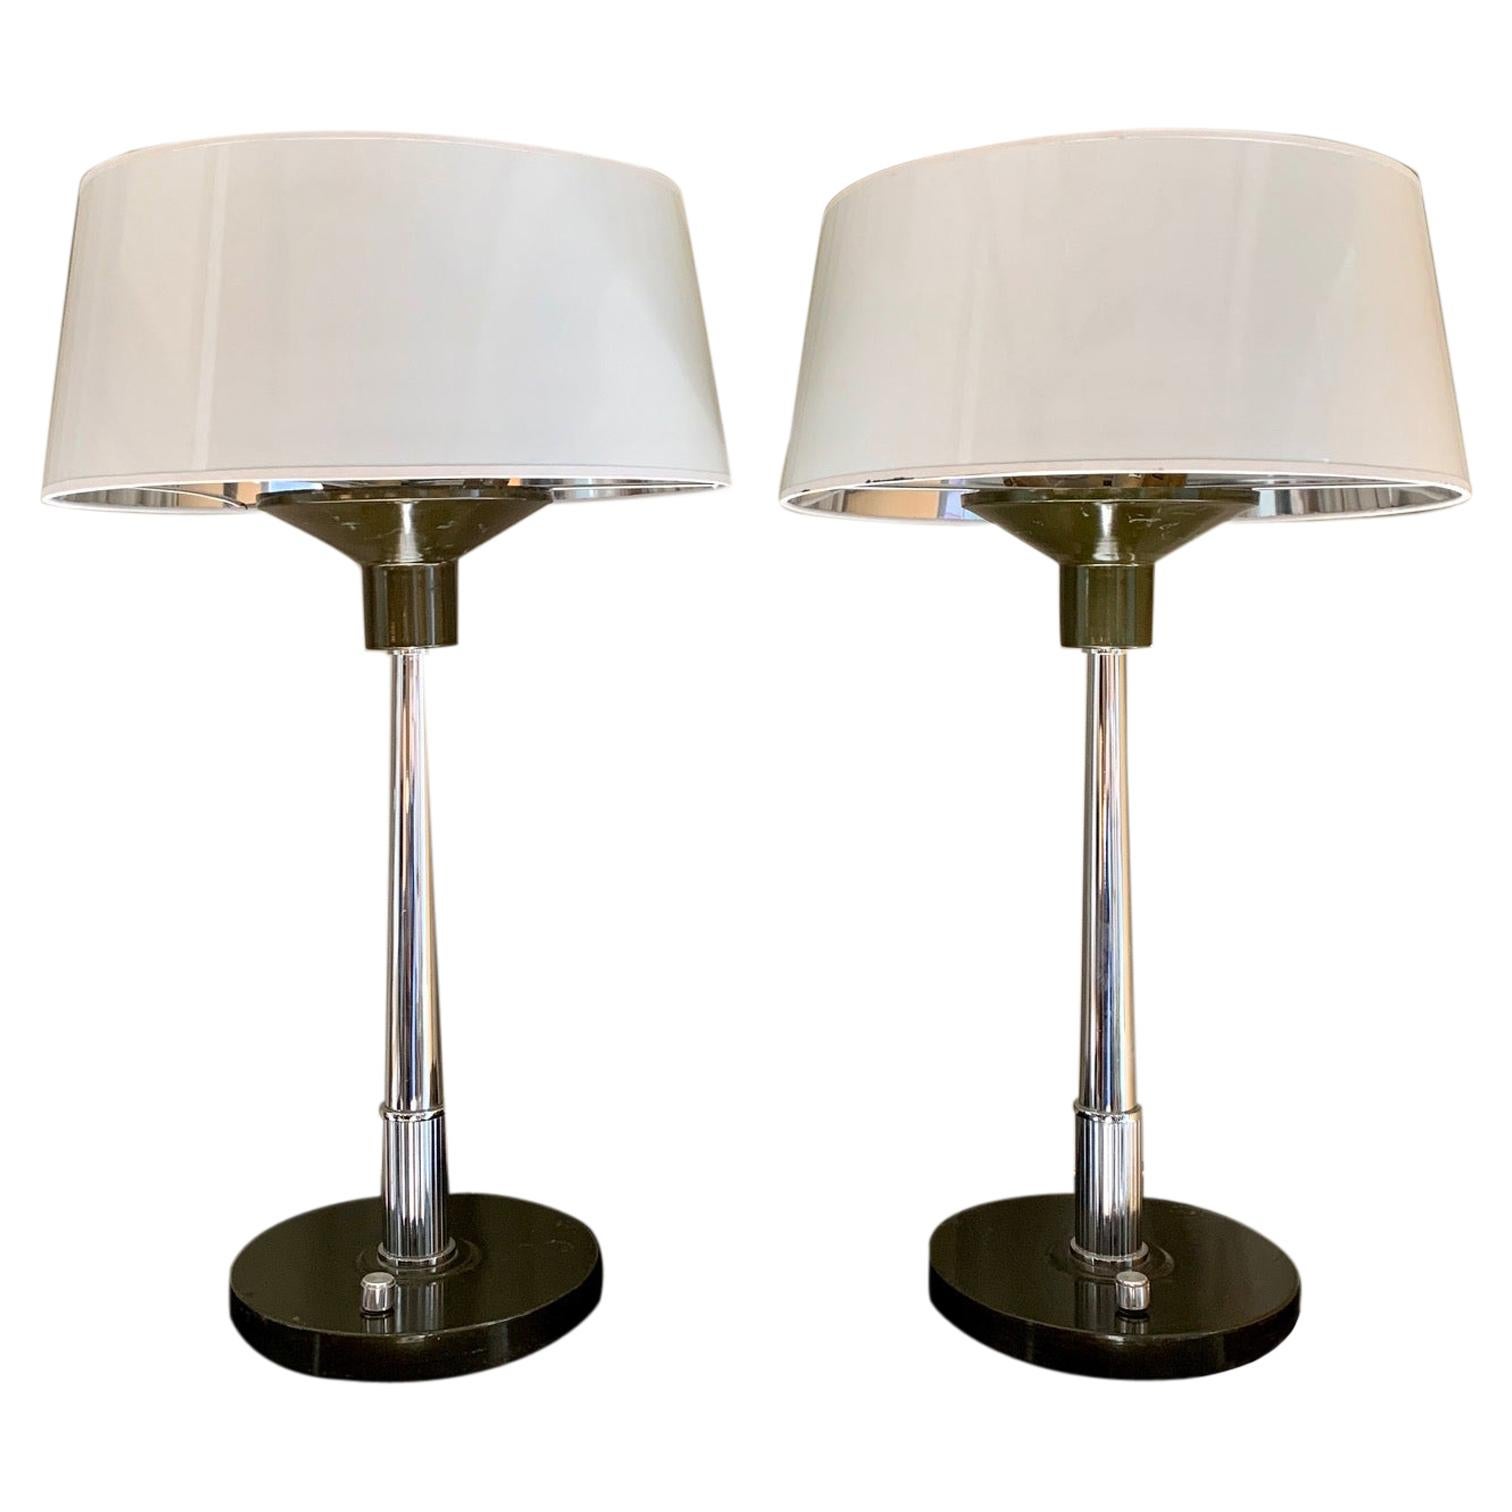 Pair of 20th Century Midcentury Desk Table Lamps